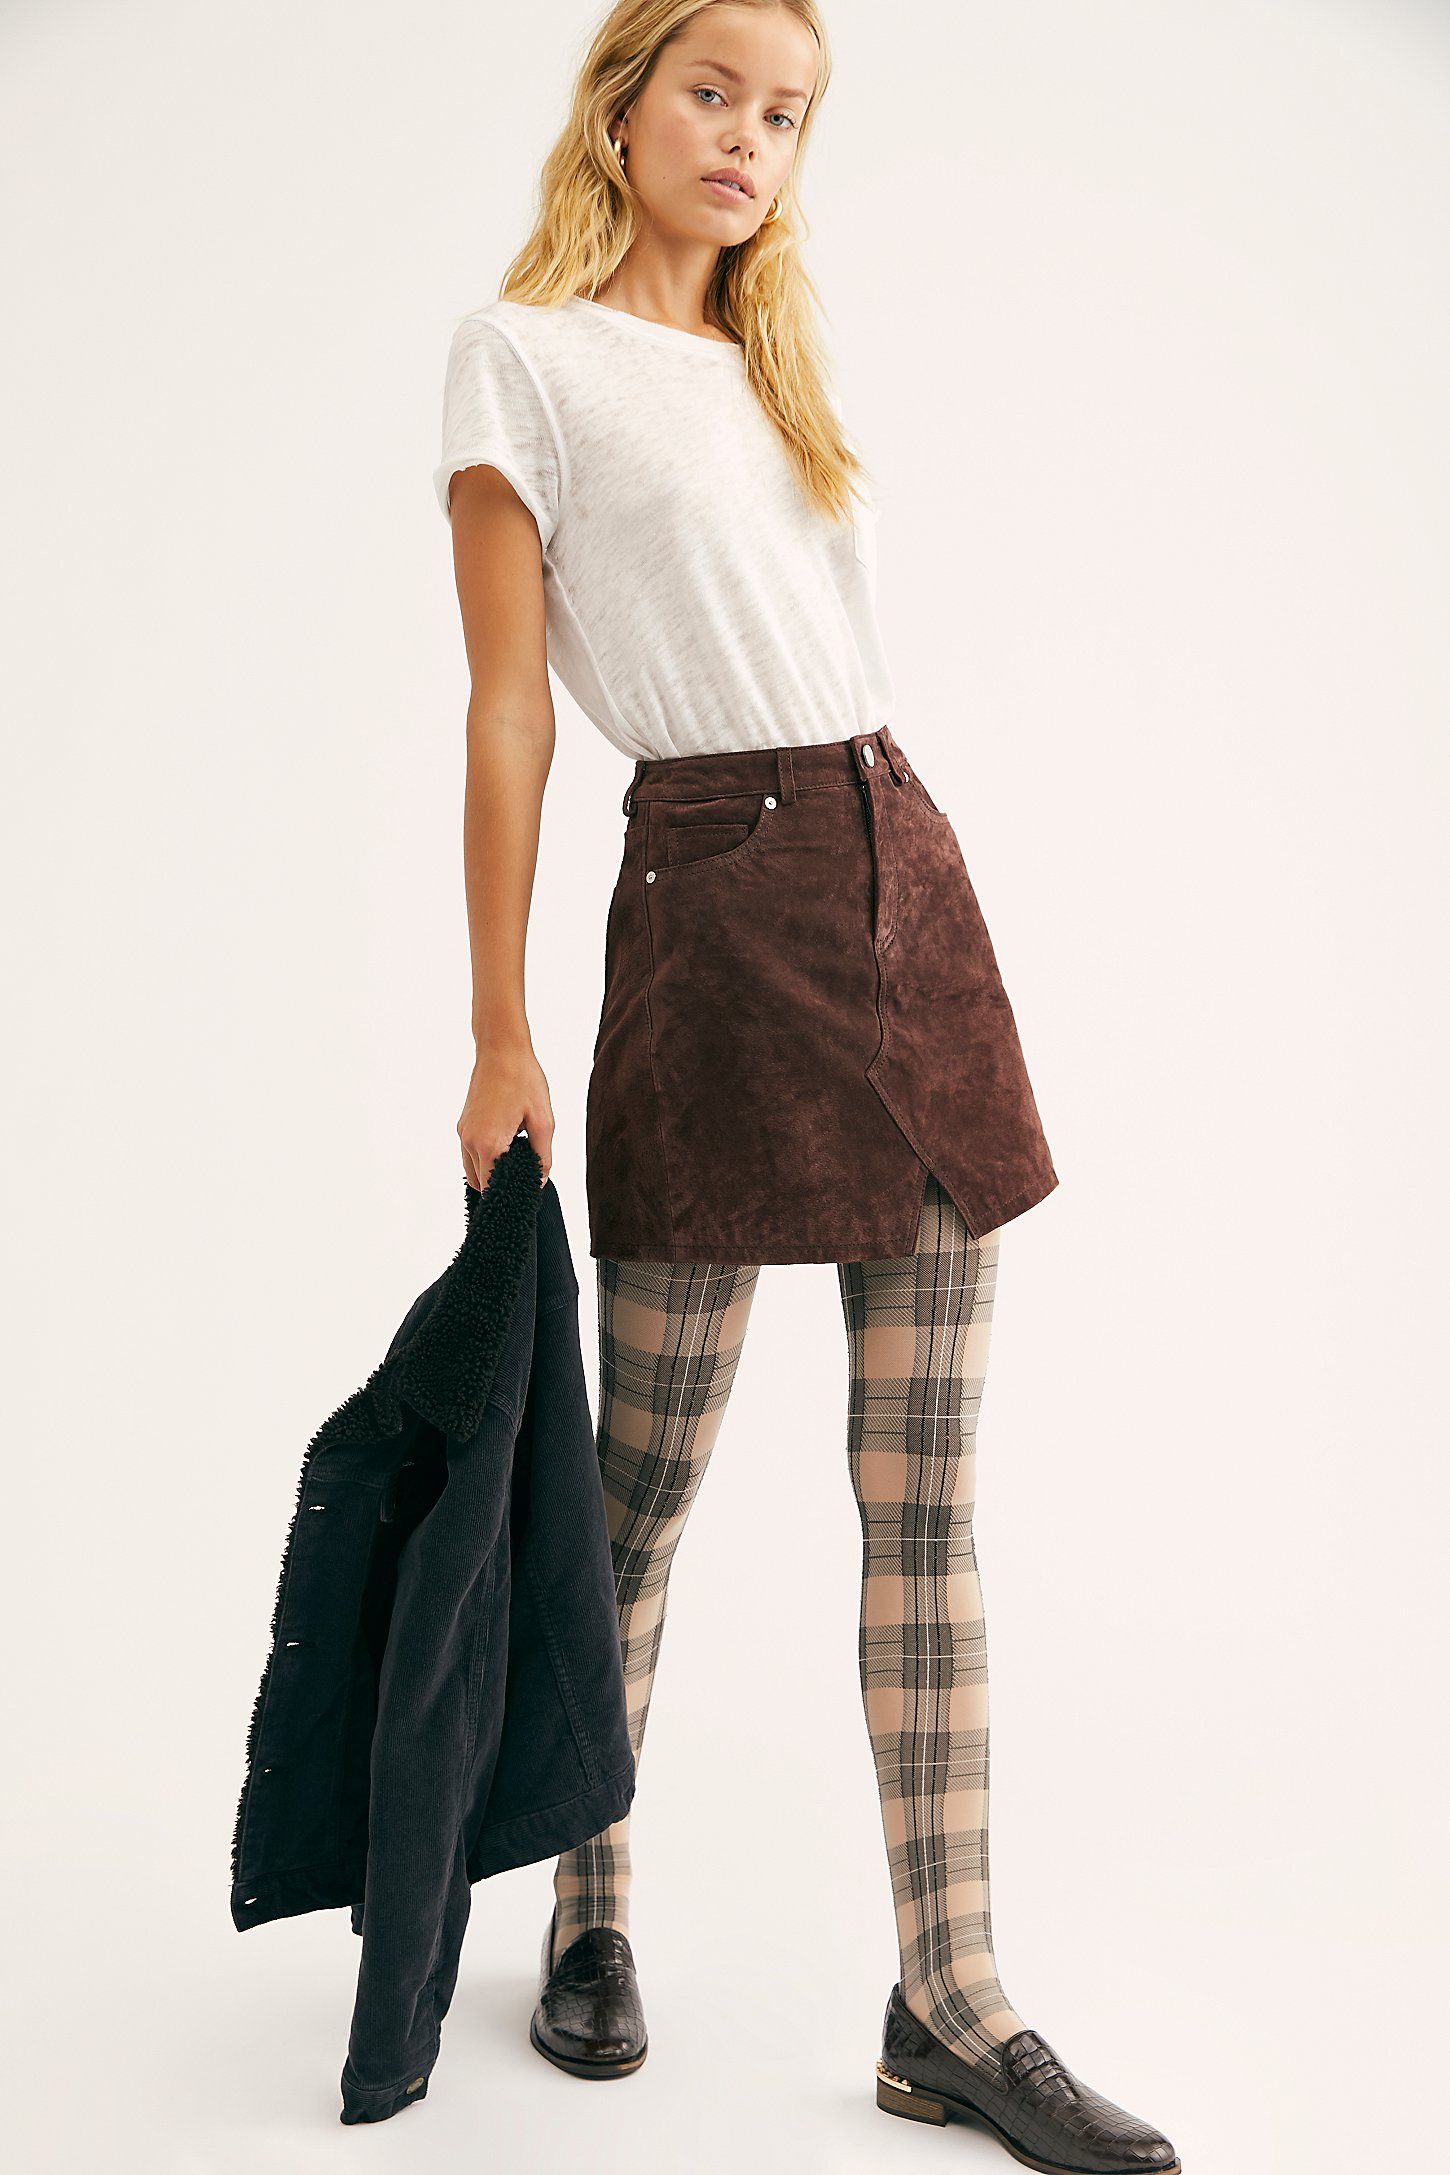 skirt with tights and booties